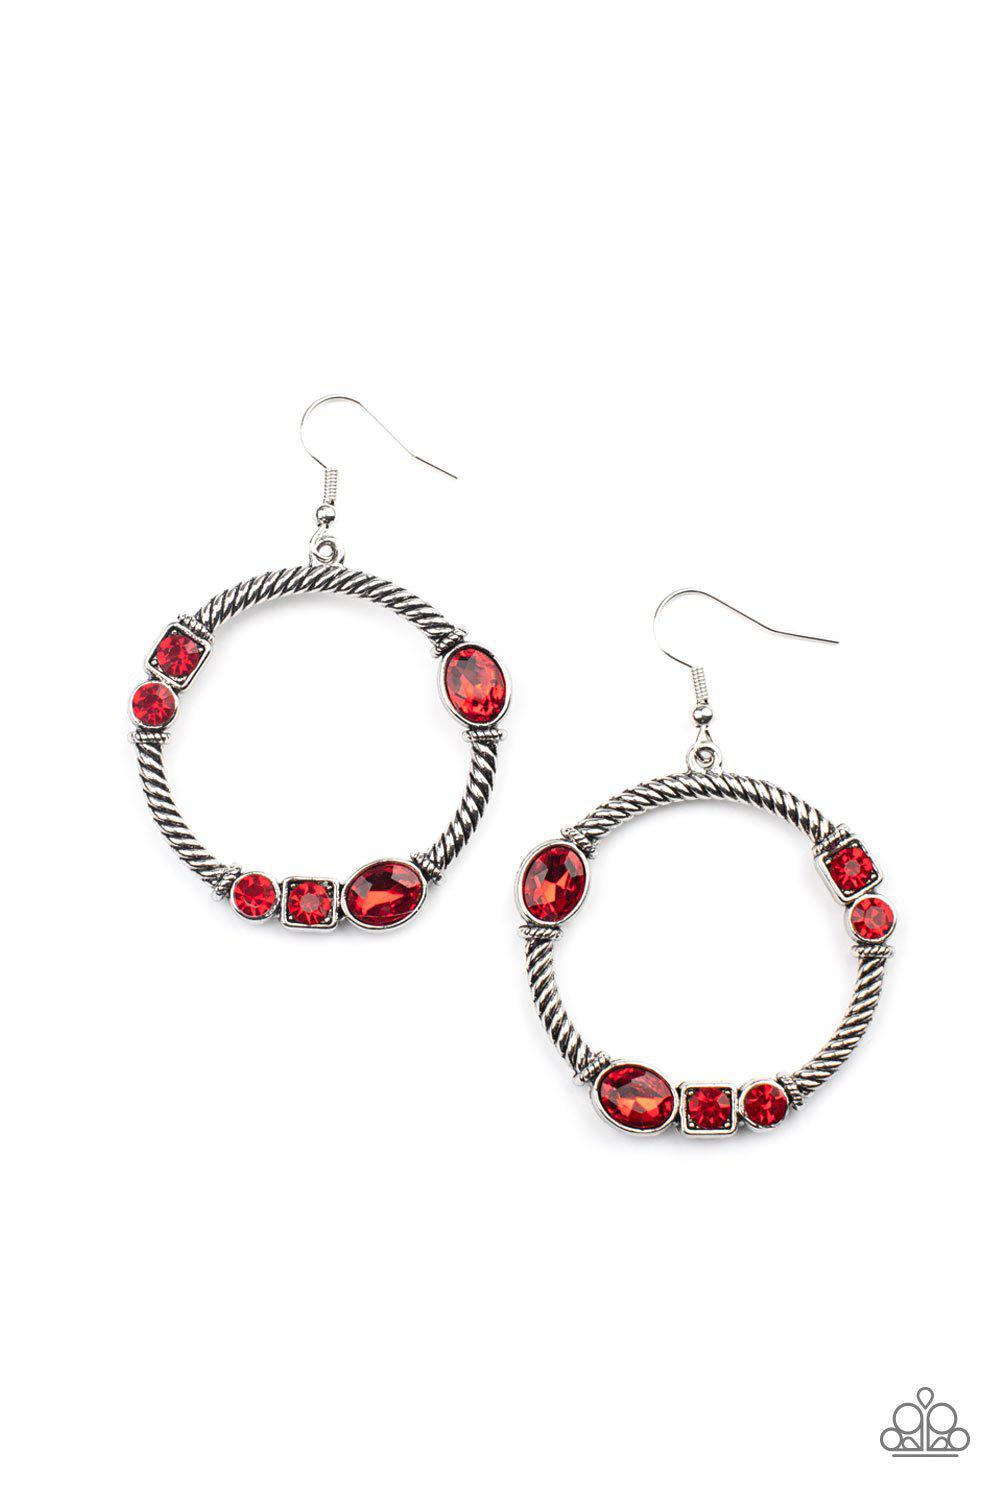 Glamorous Garland Red Rhinestone and Silver Earrings - Paparazzi Accessories- lightbox - CarasShop.com - $5 Jewelry by Cara Jewels